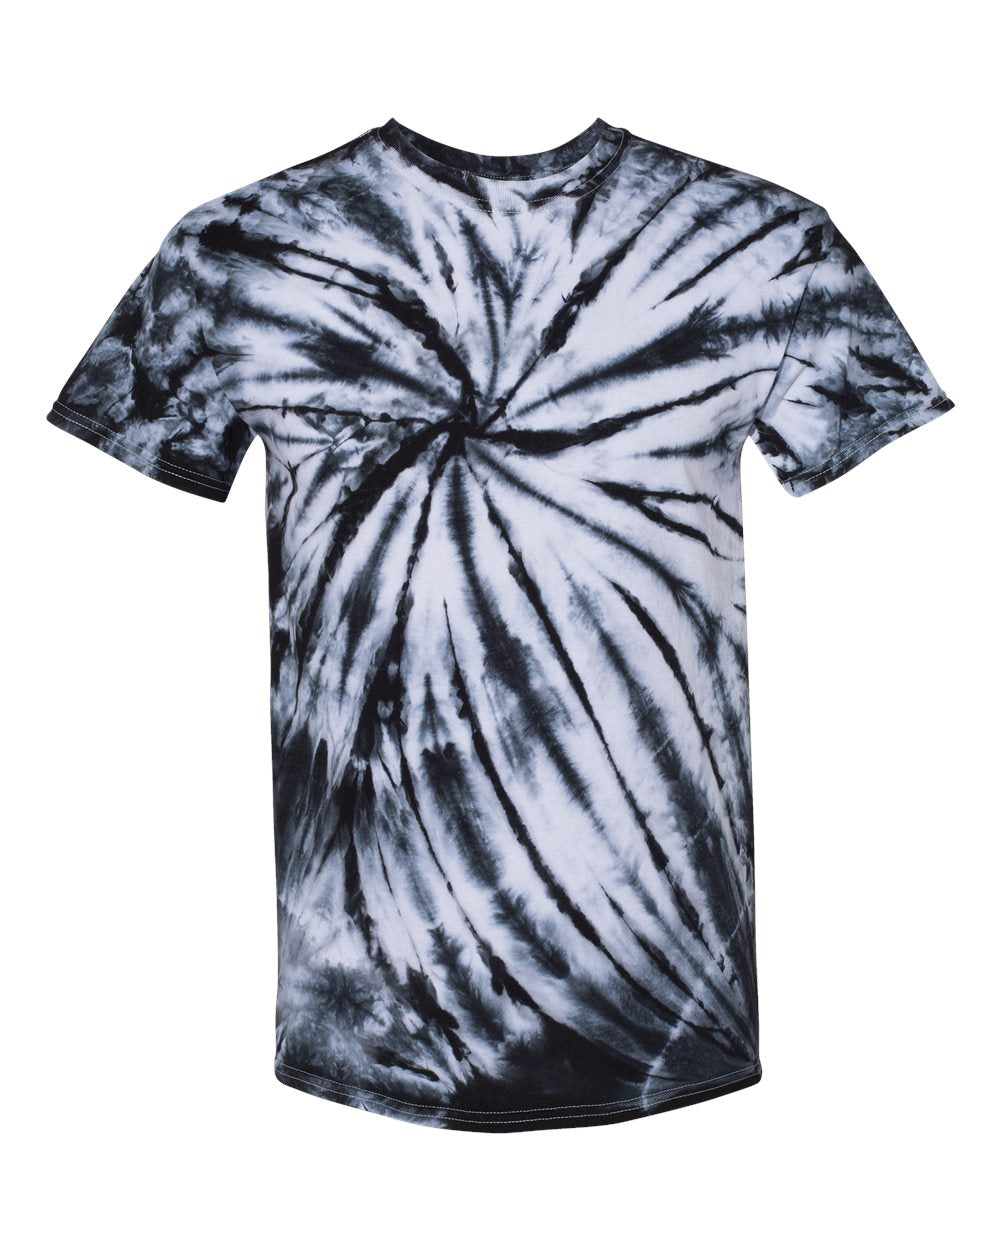 Dyenomite - Contrast Cyclone Tie-Dyed T-Shir